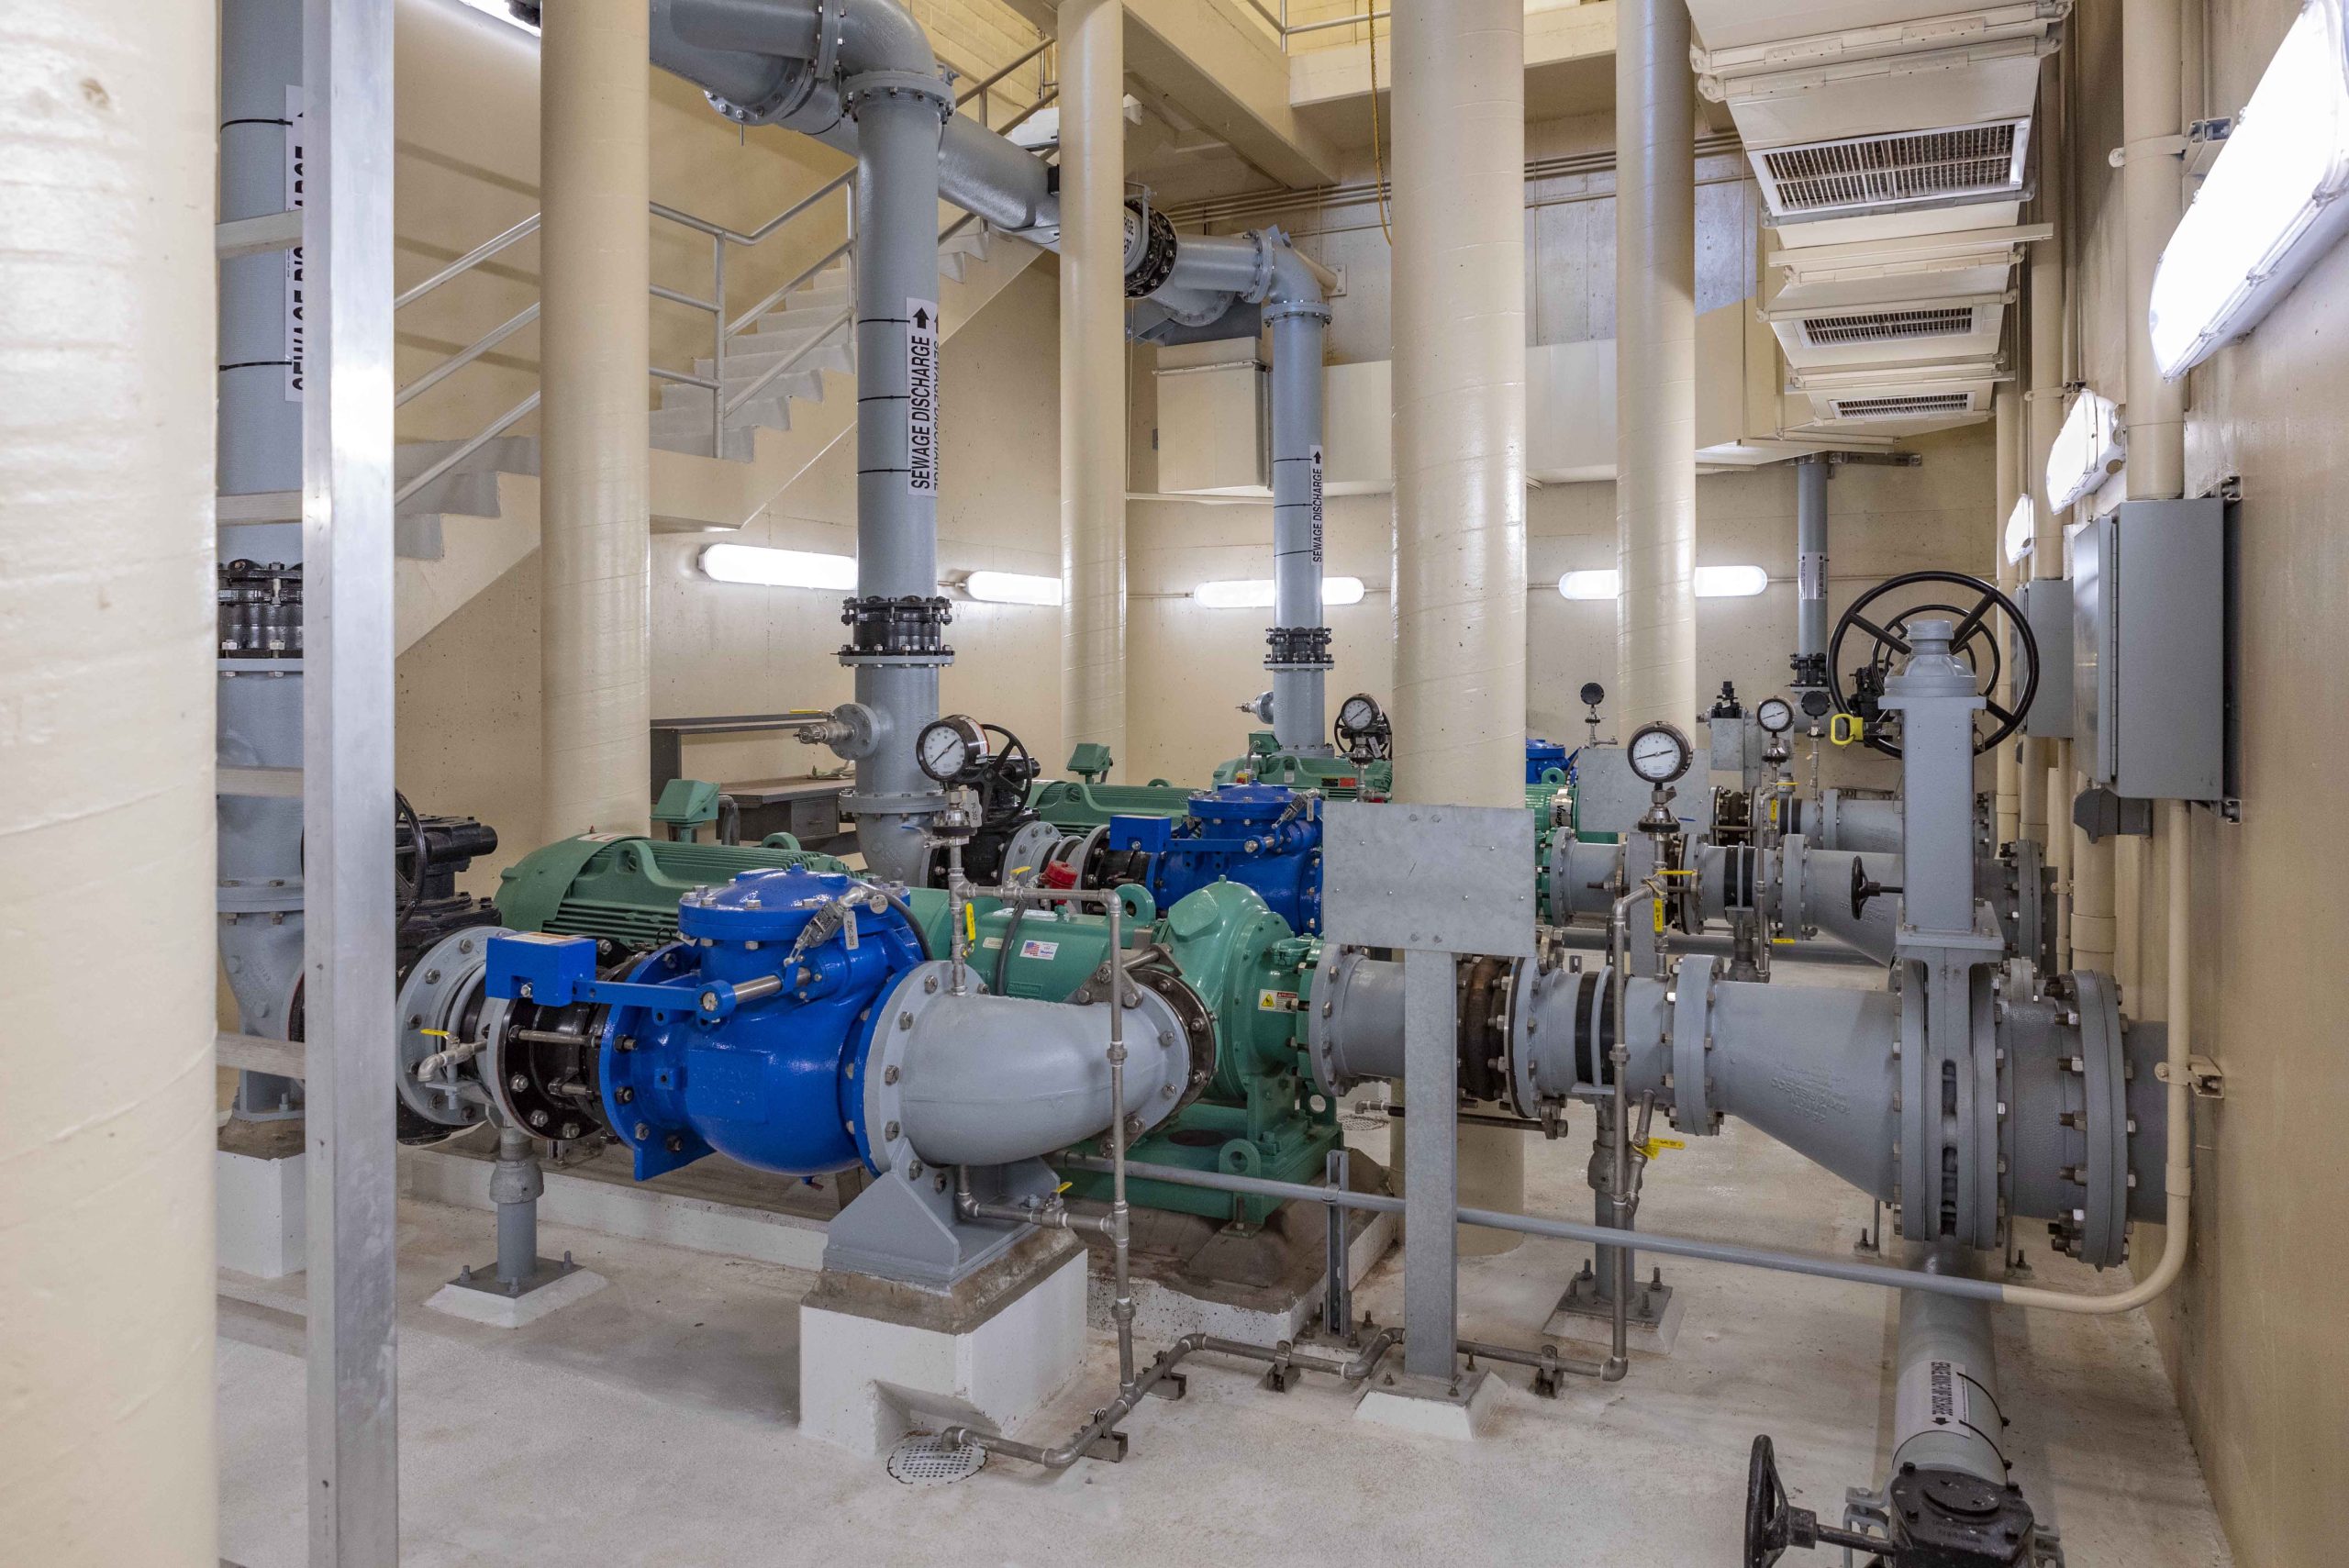 Rancho San Diego Sewer Pump Station pumps and pipes